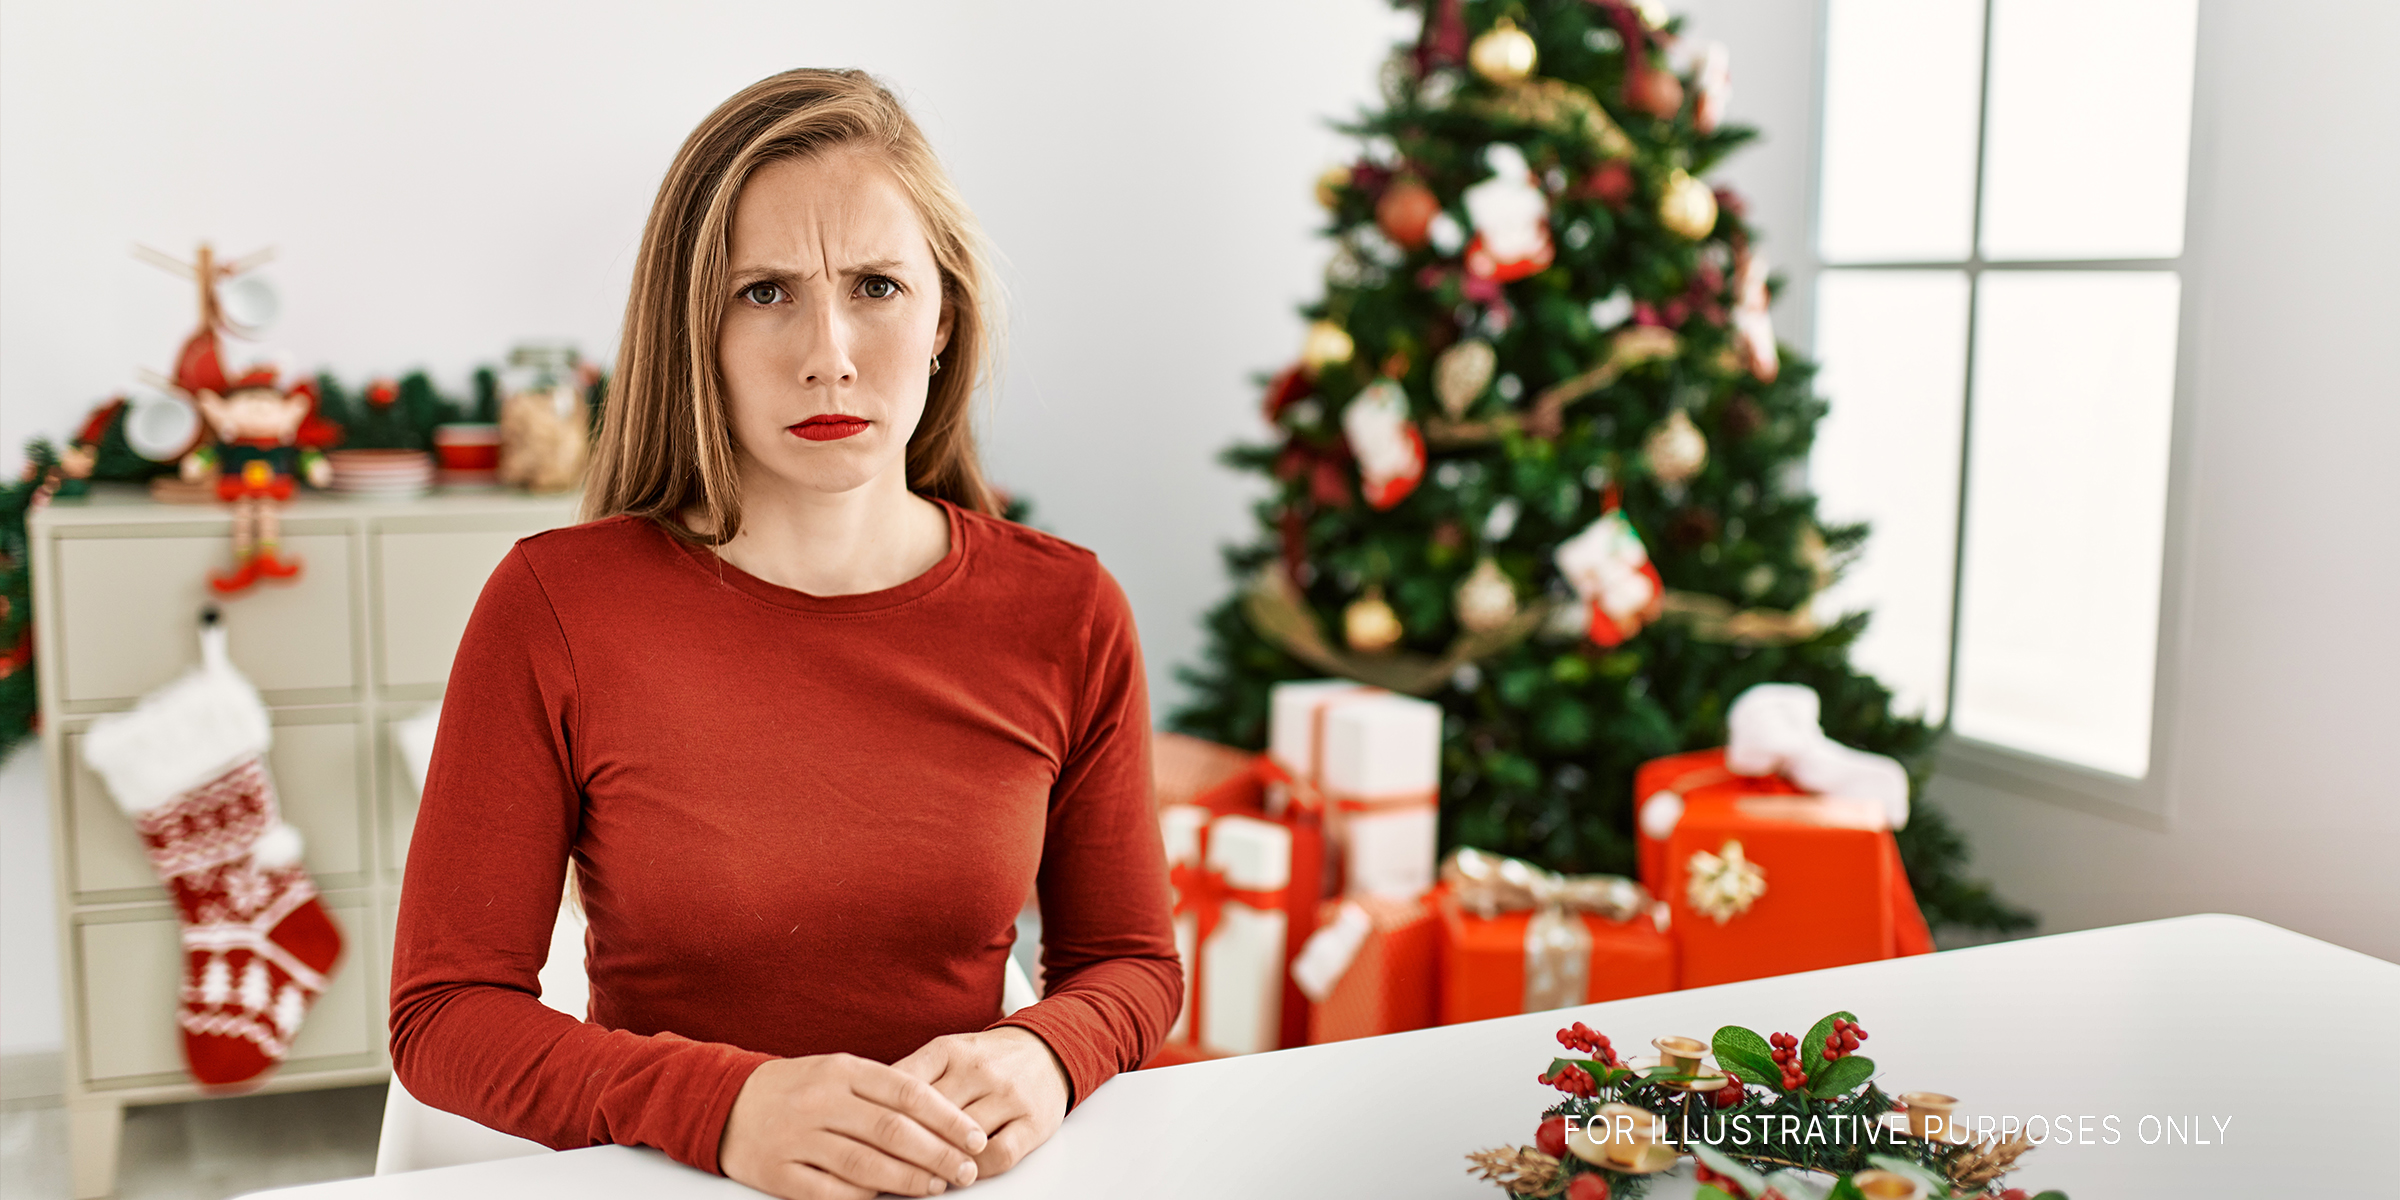 An angry woman standing in front of a Christmas tree | Source: Shutterstock